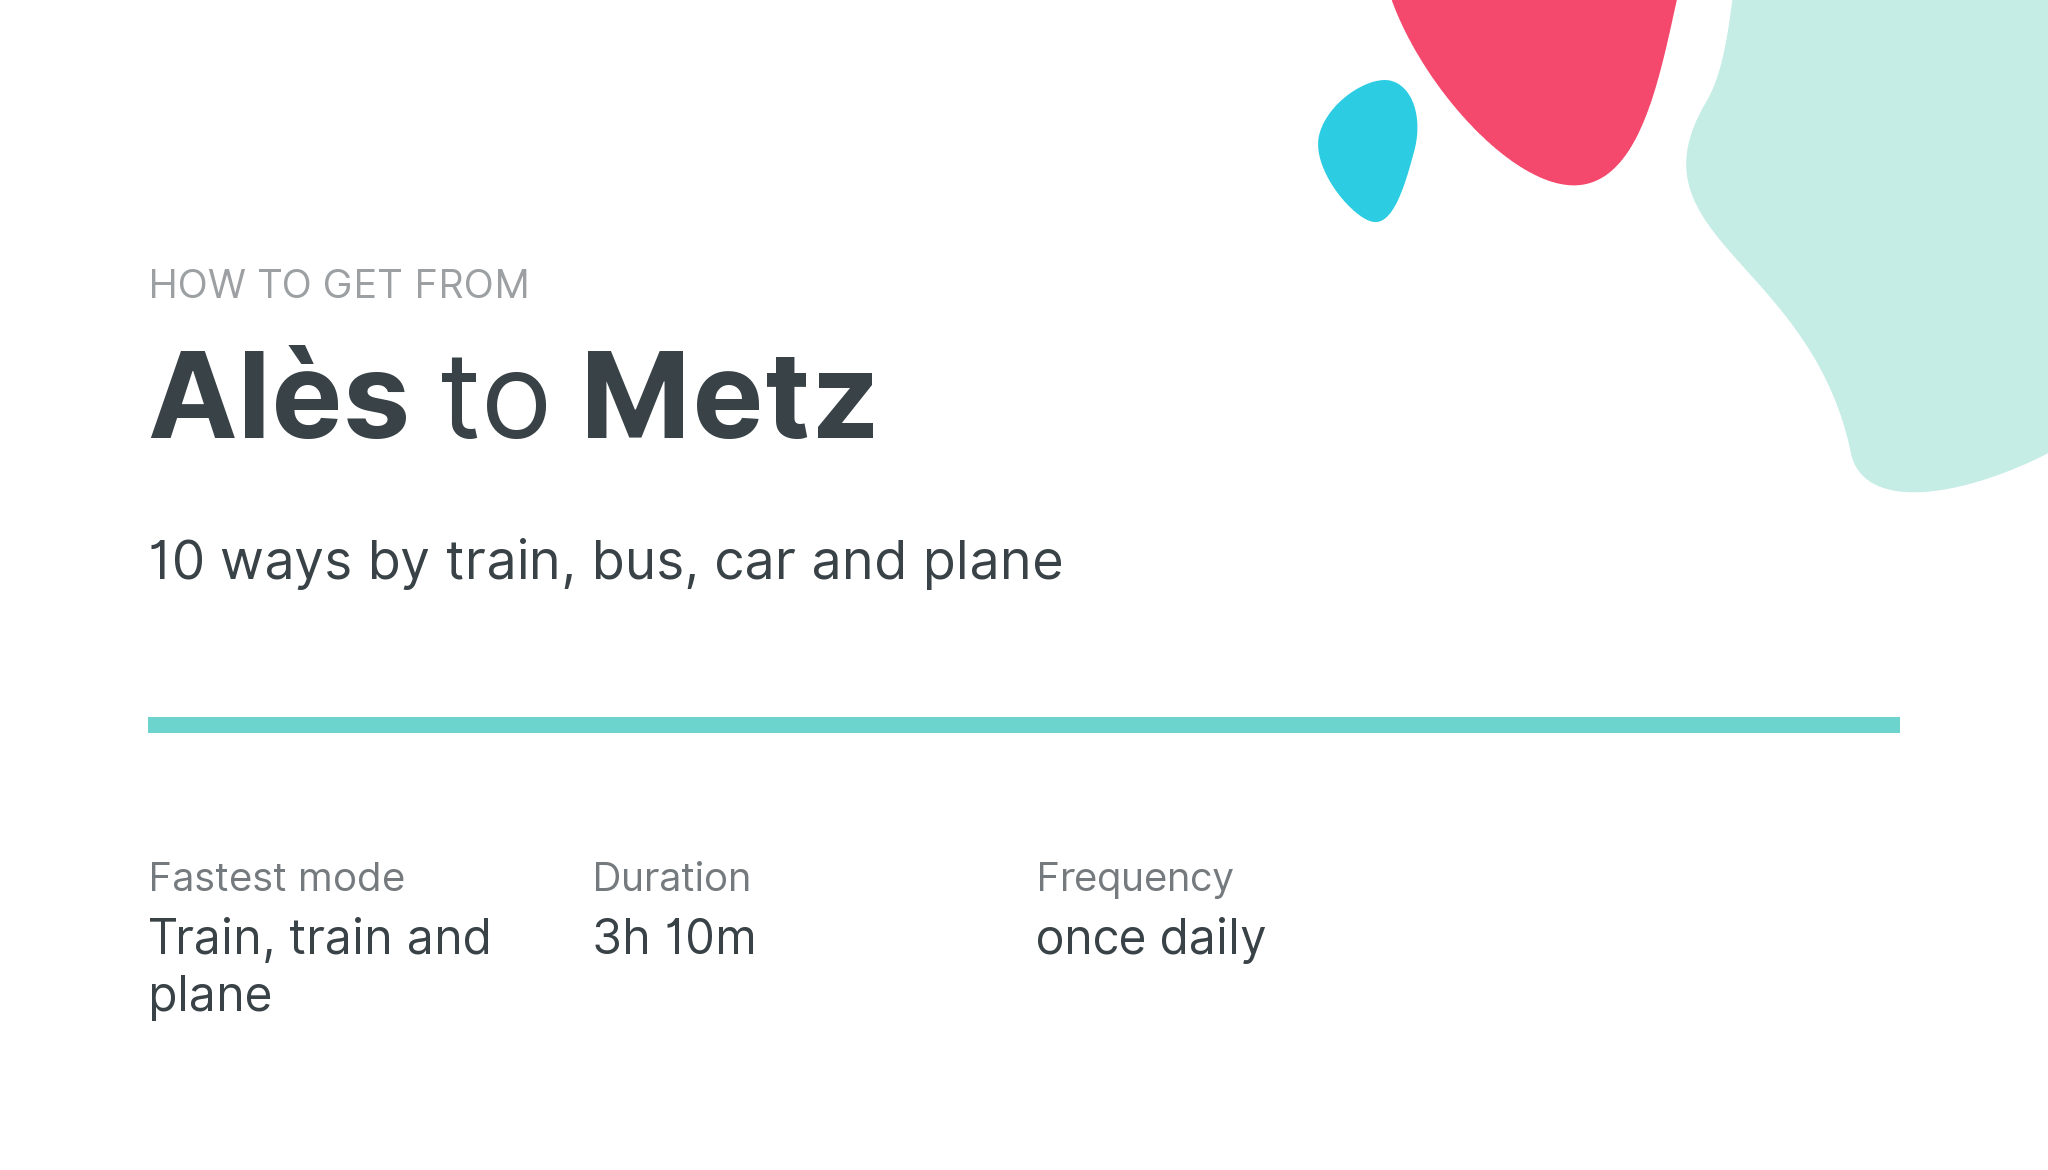 How do I get from Alès to Metz